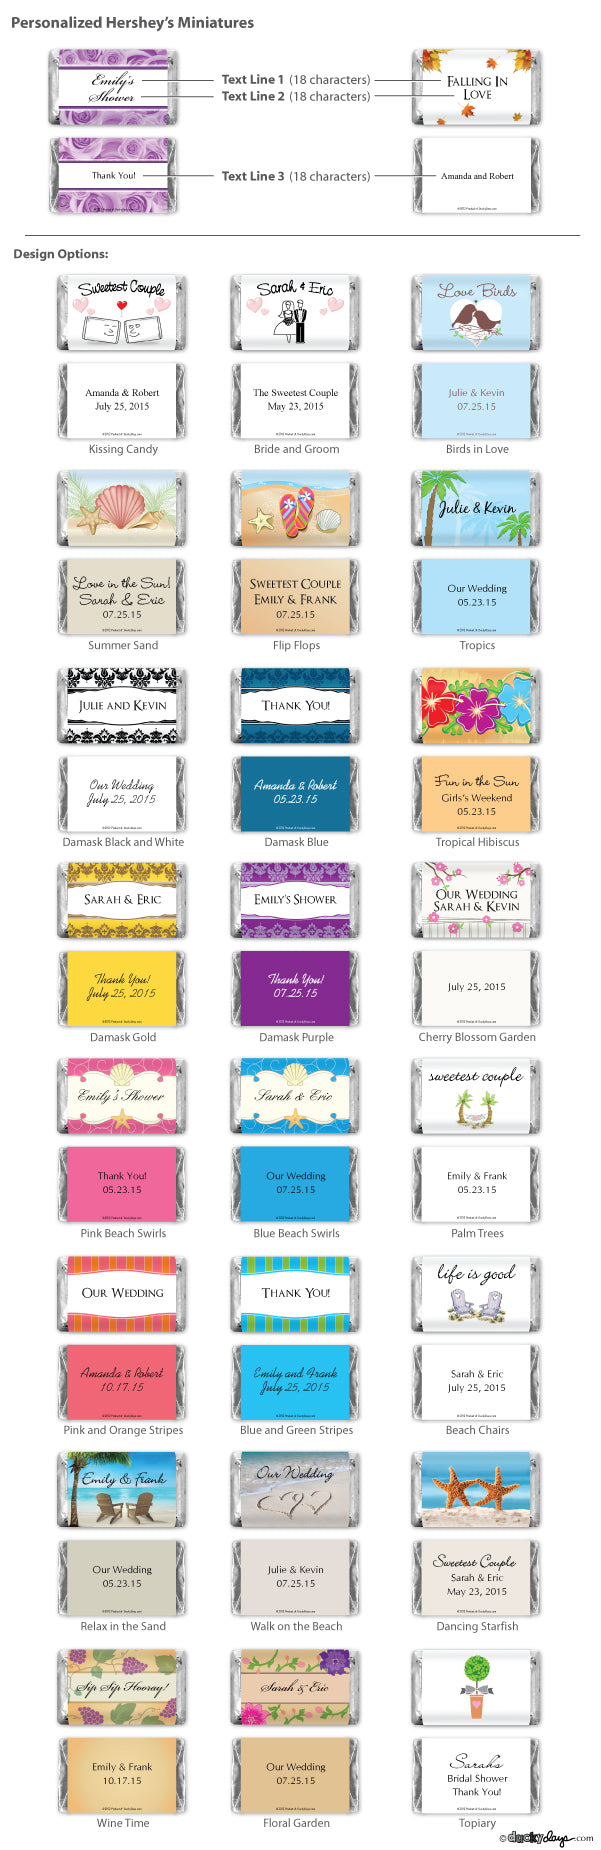 Personalized Hershey's Mini's (Many Designs Available) - Alternate Image 2 | My Wedding Favors